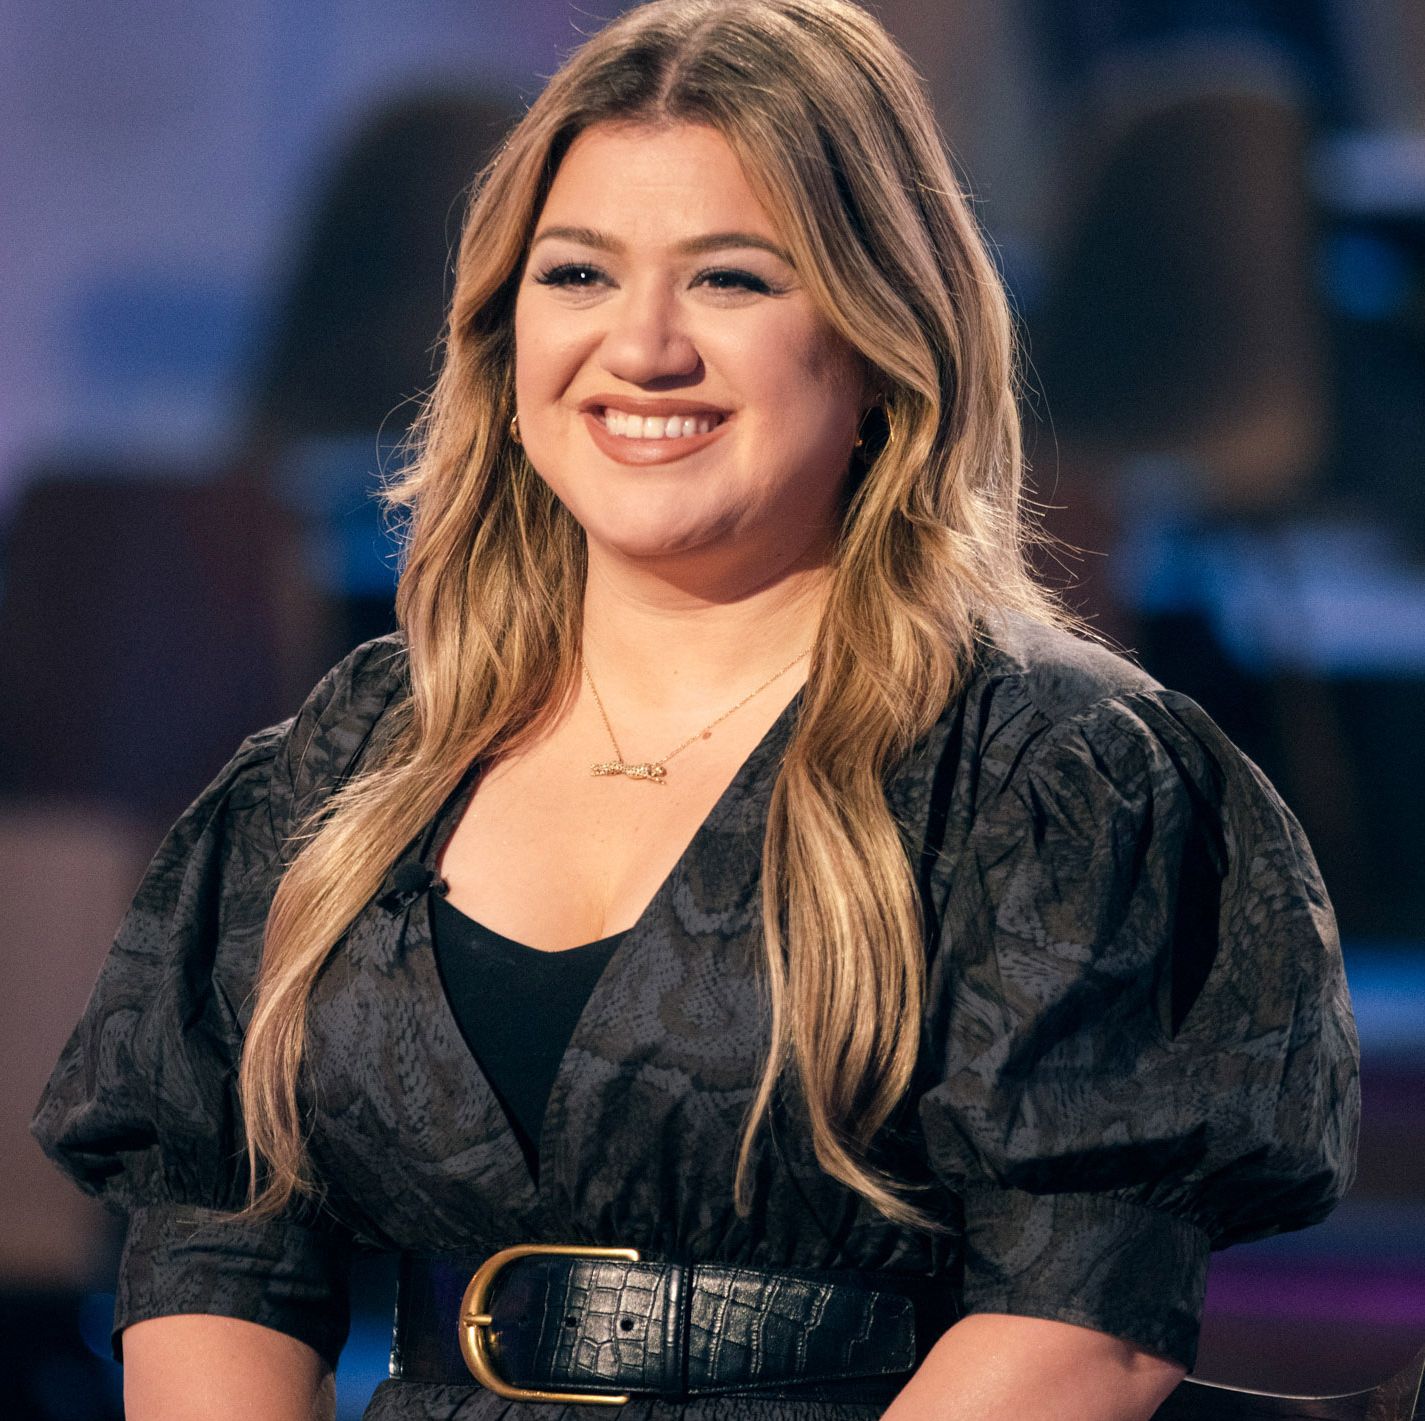 Kelly Clarkson's Instagram About 'Encanto' Is Sparking Some Strong Reactions From Parents